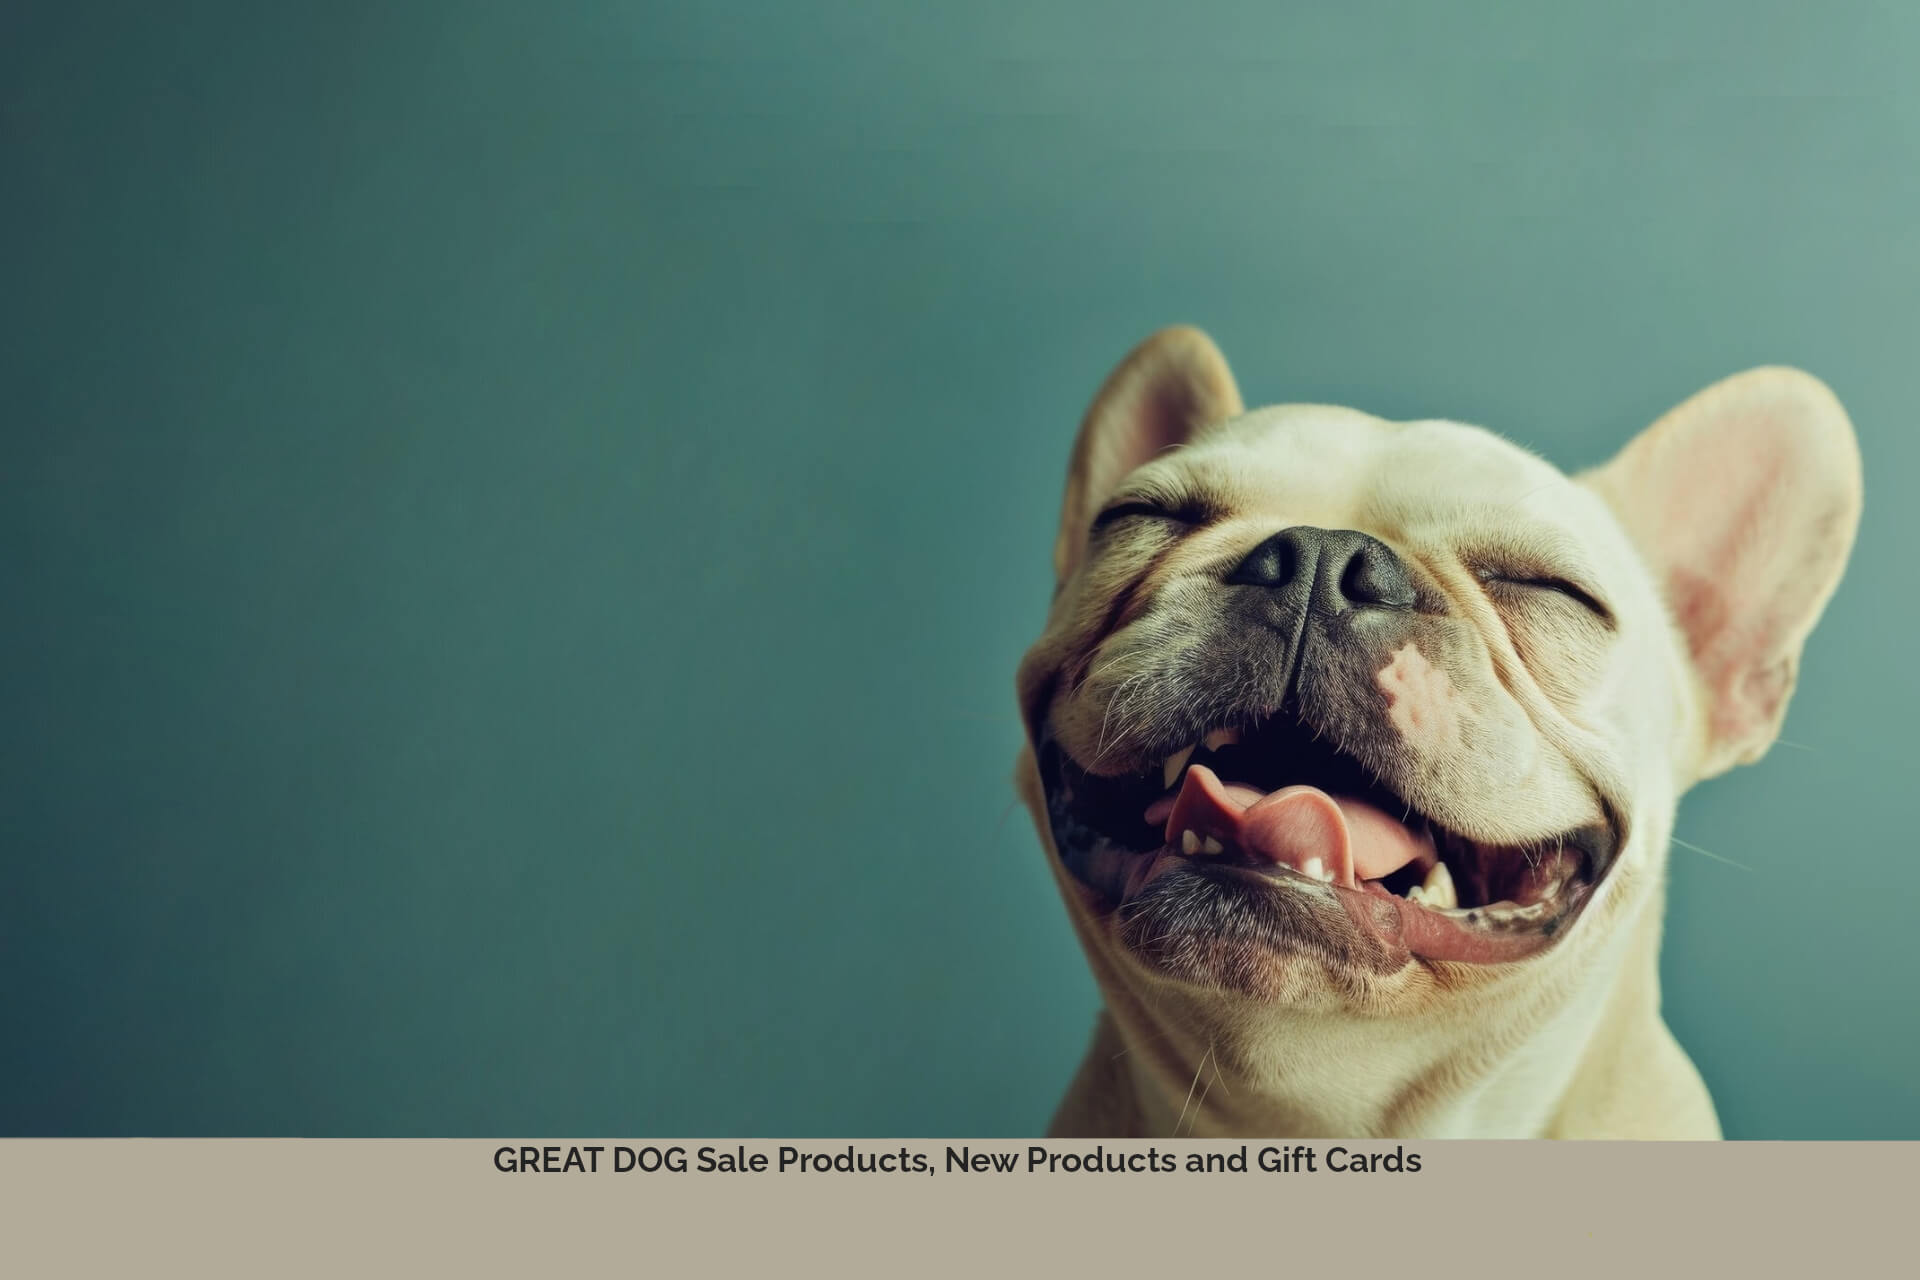 smiling-pit-bull-puppy-image-with-text-great-dog-sale-new-gift-card-collection